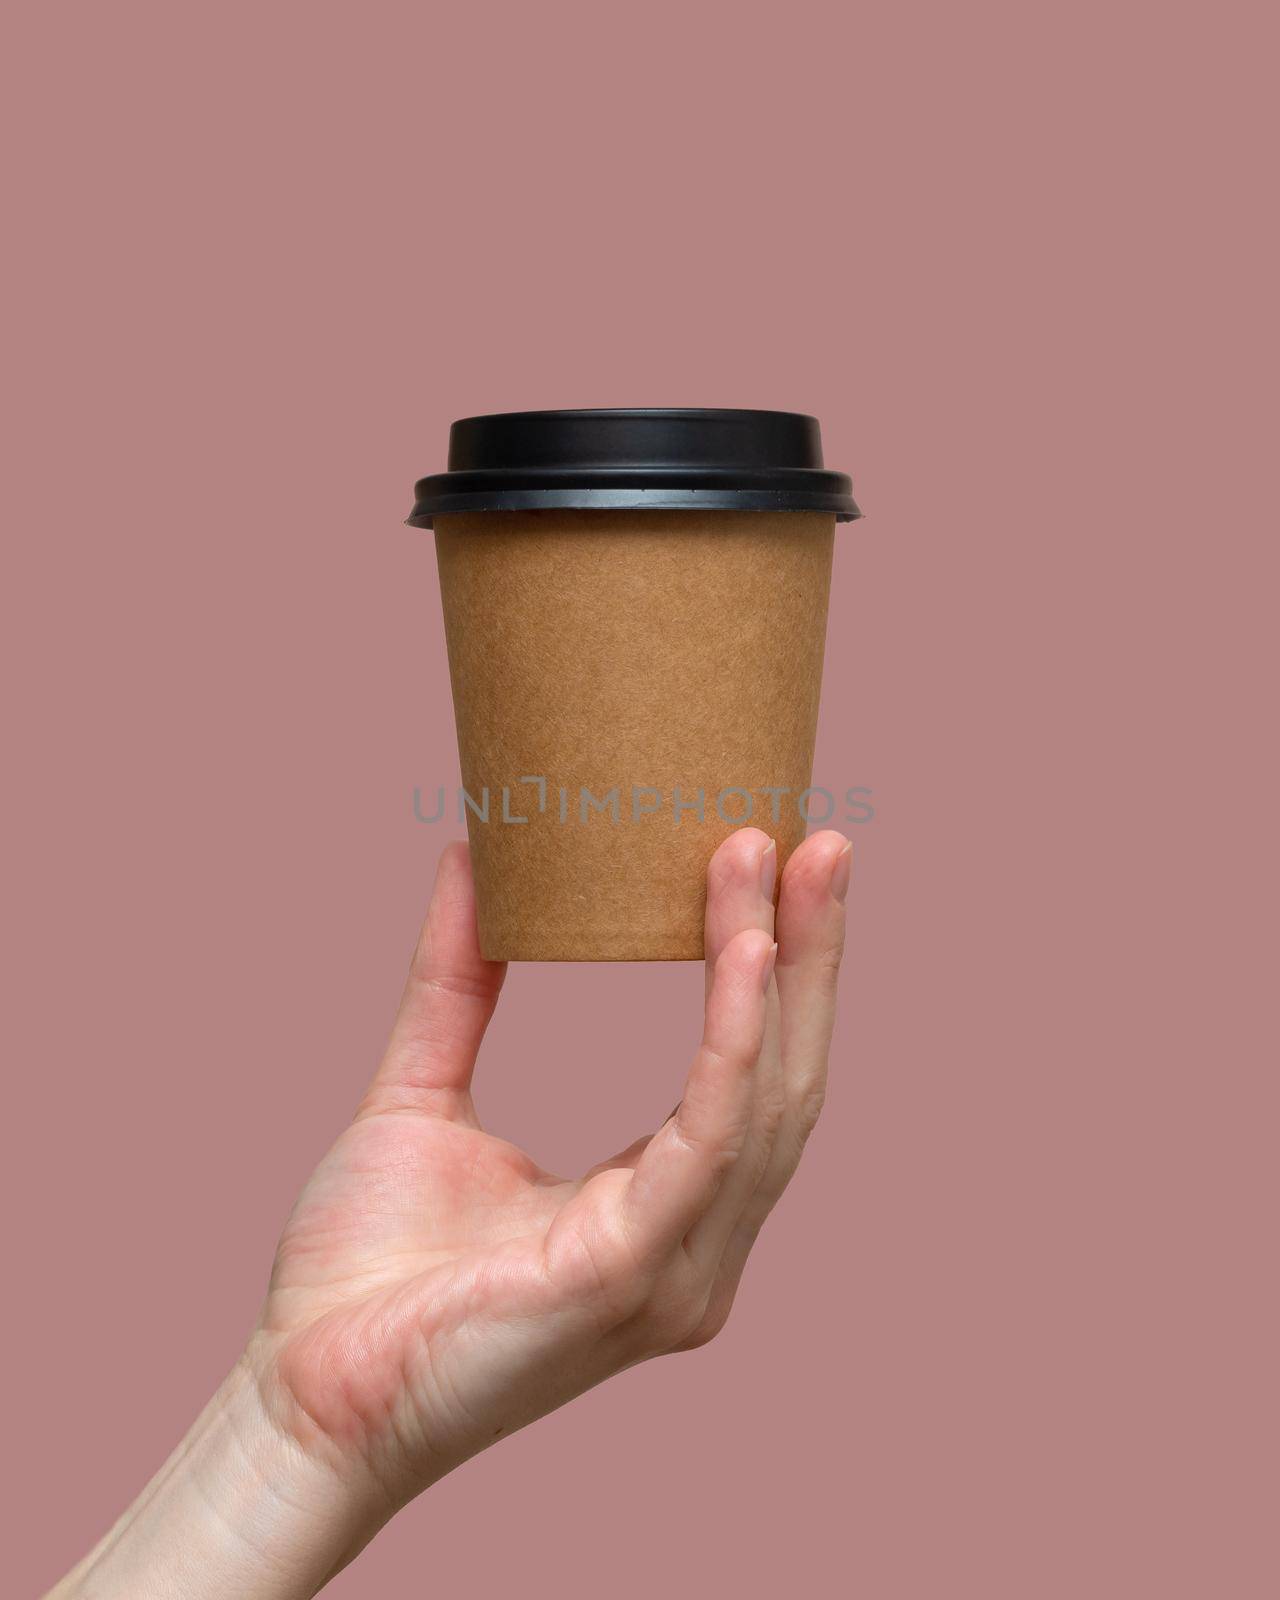 Woman hands hold paper cup on pink background. Copy space. photo